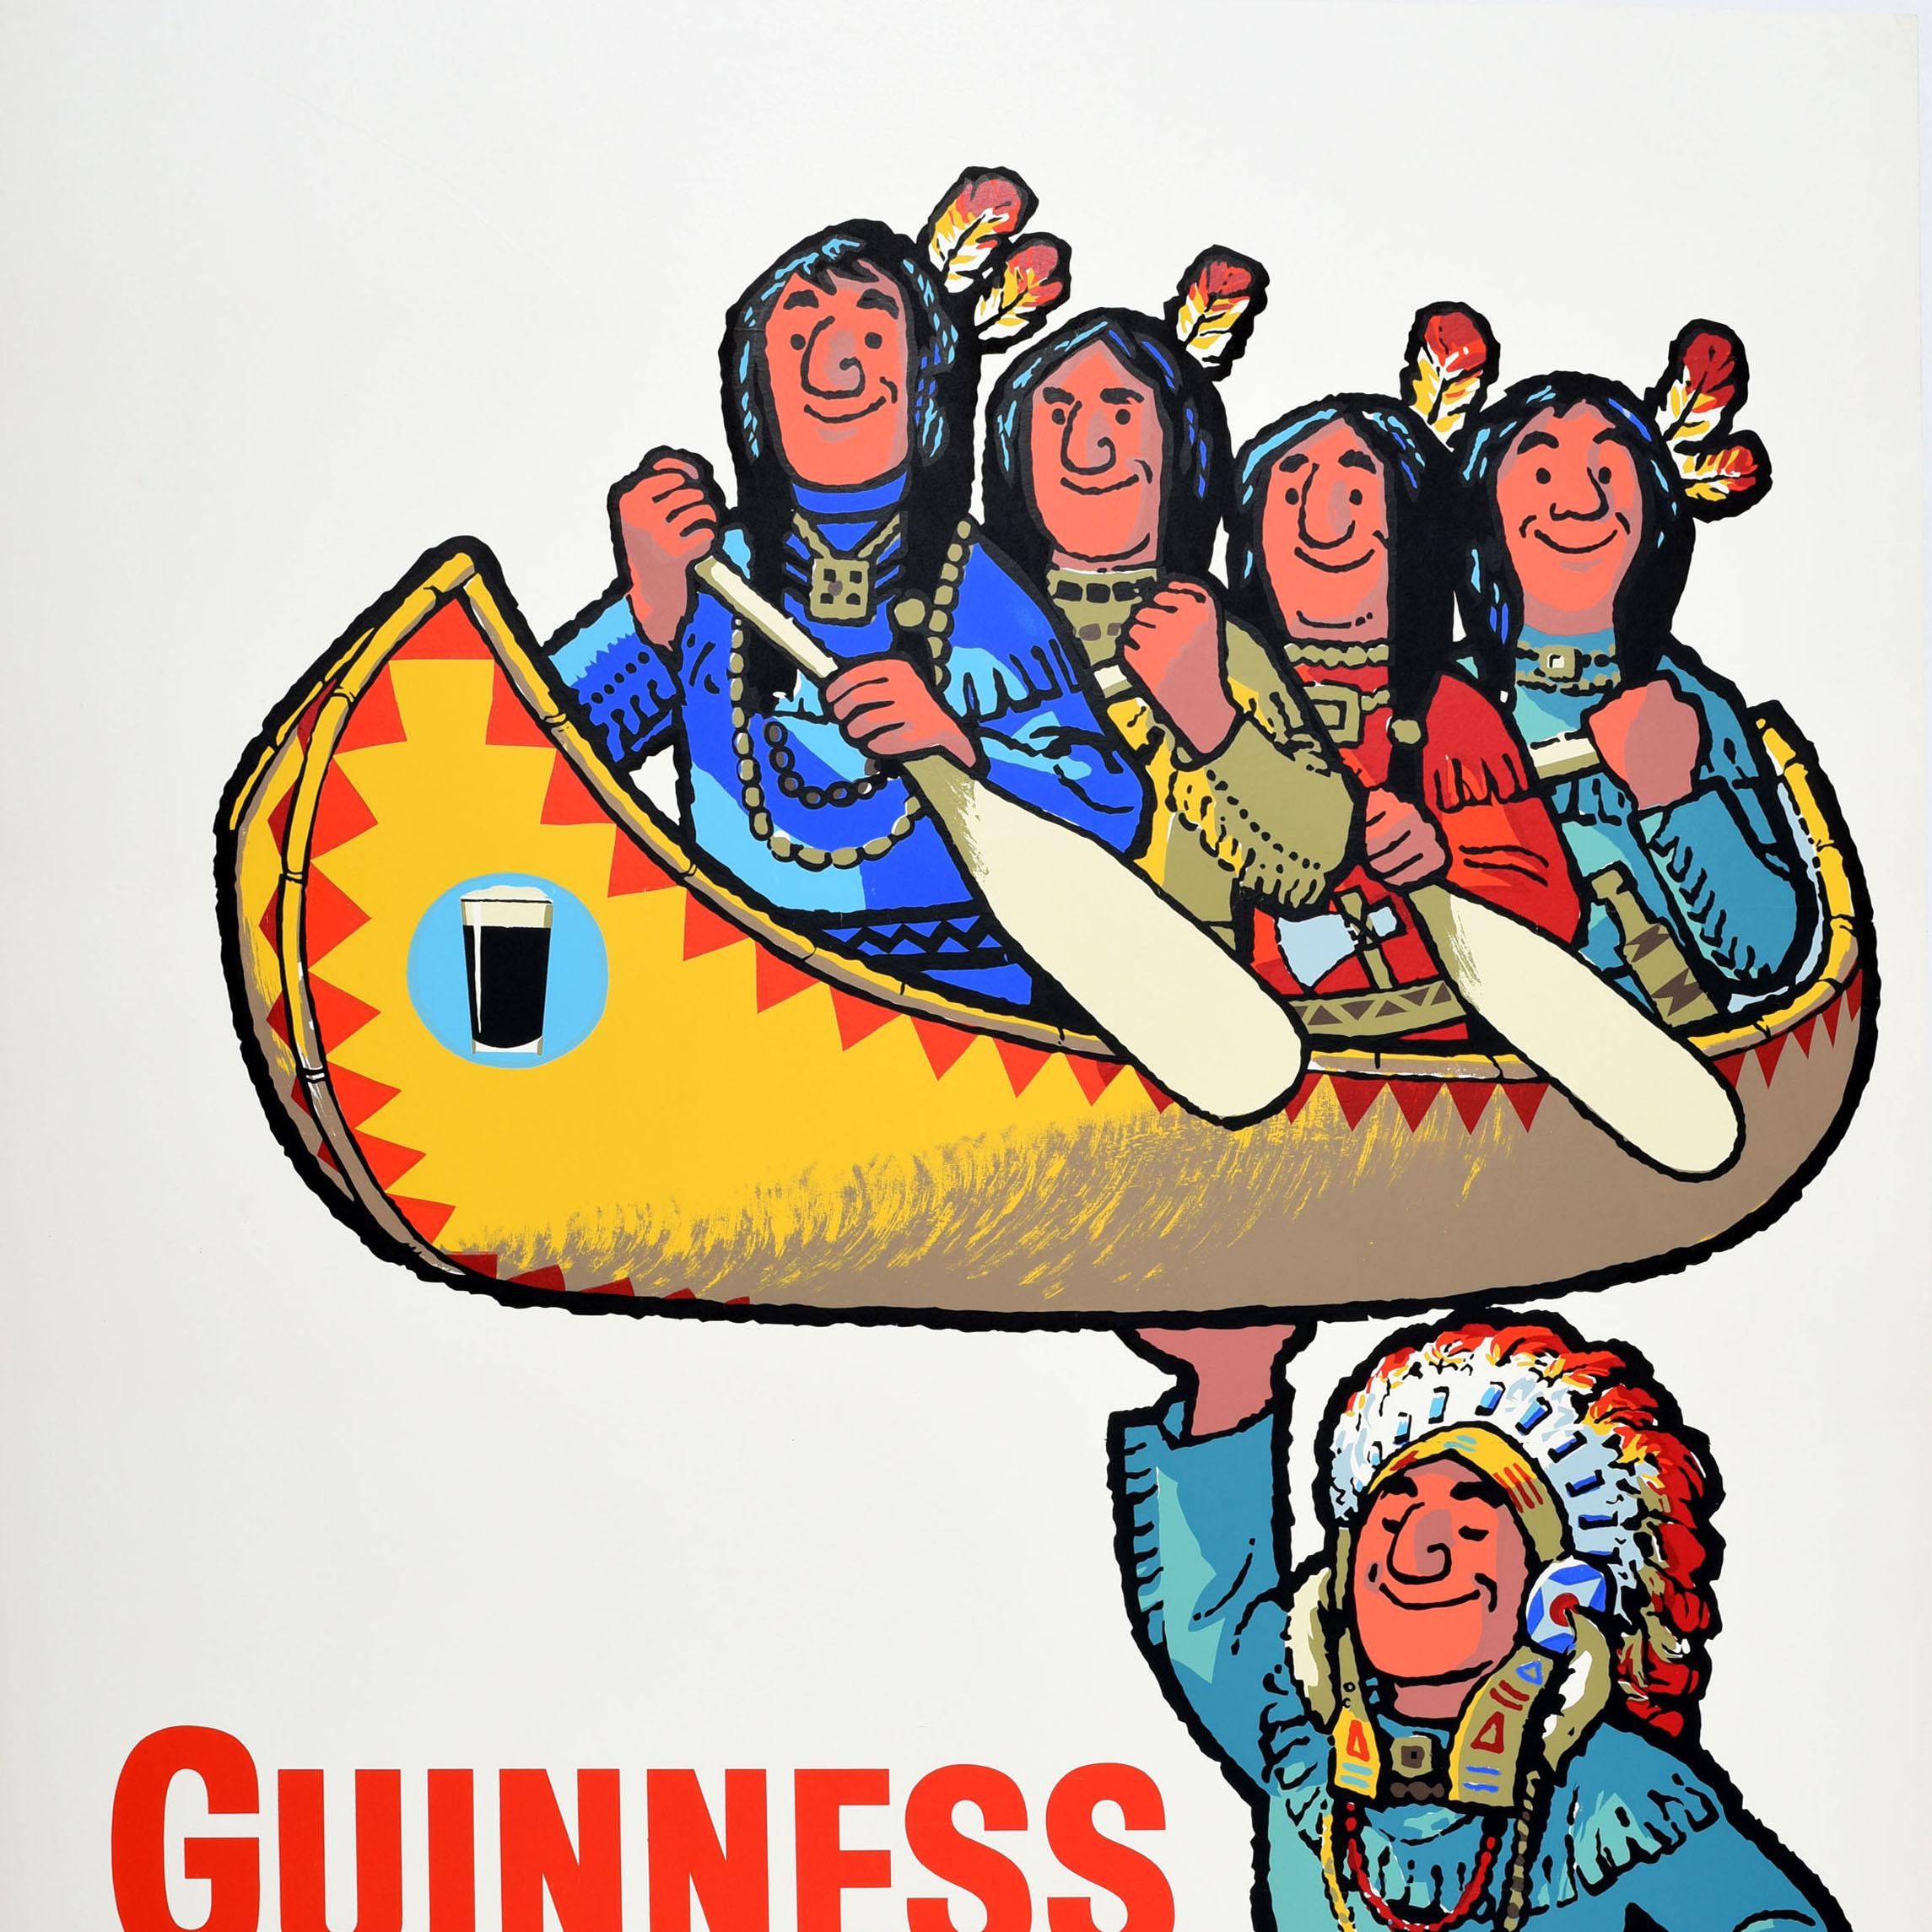 British Original Vintage Advertising Poster Guinness Him Strong Native American Canoe For Sale